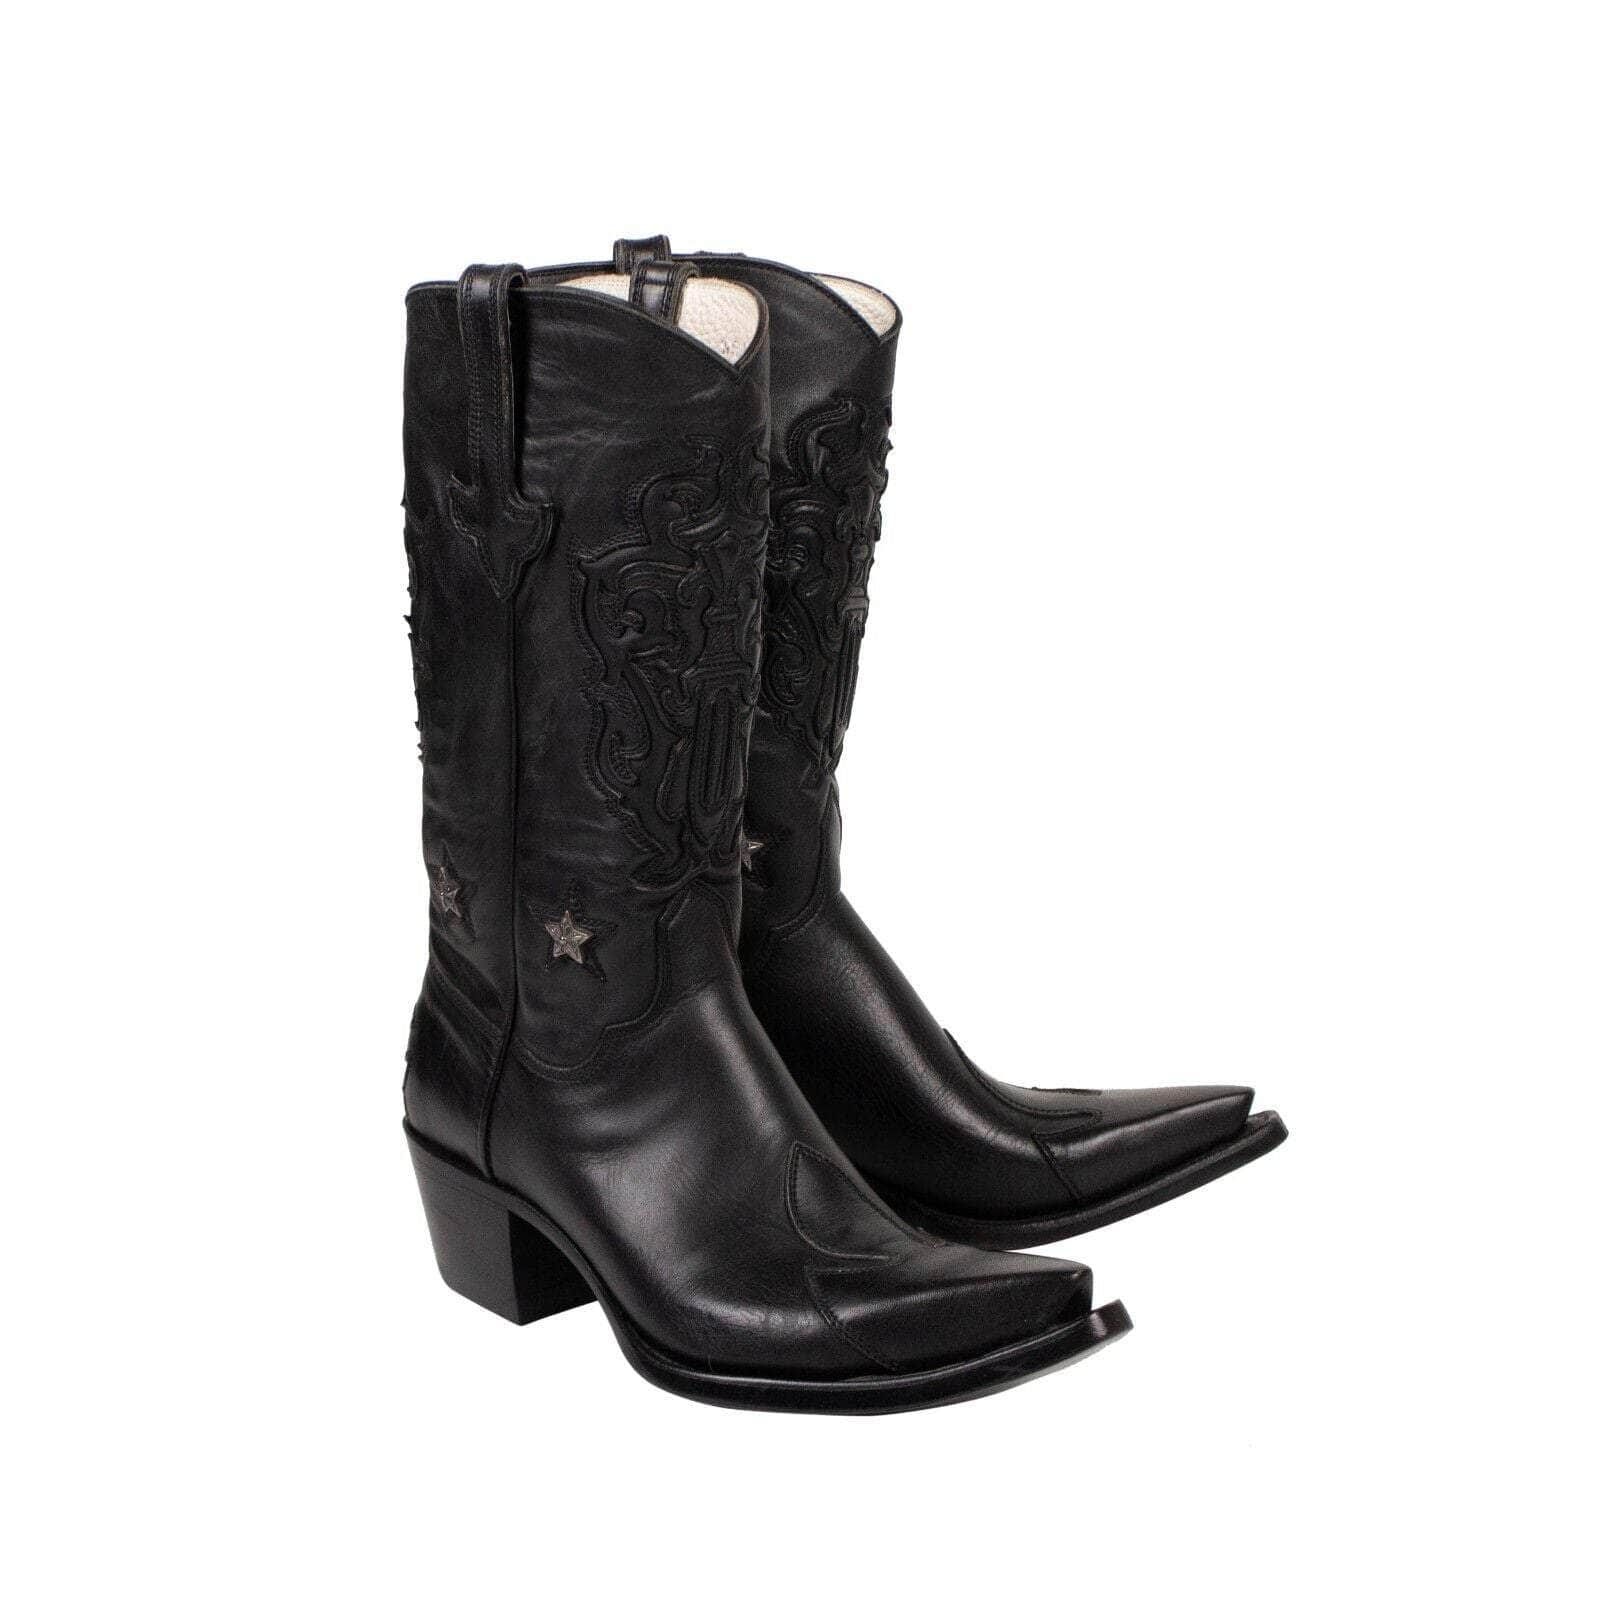 CHROME HEARTS channelenable-all, chicmi, chrome-hearts, couponcollection, gender-womens, main-shoes, over-5000, size-8-5 8.5 Black Leather Western Cowboy Boots 95-CRH-2002/8.5 95-CRH-2002/8.5